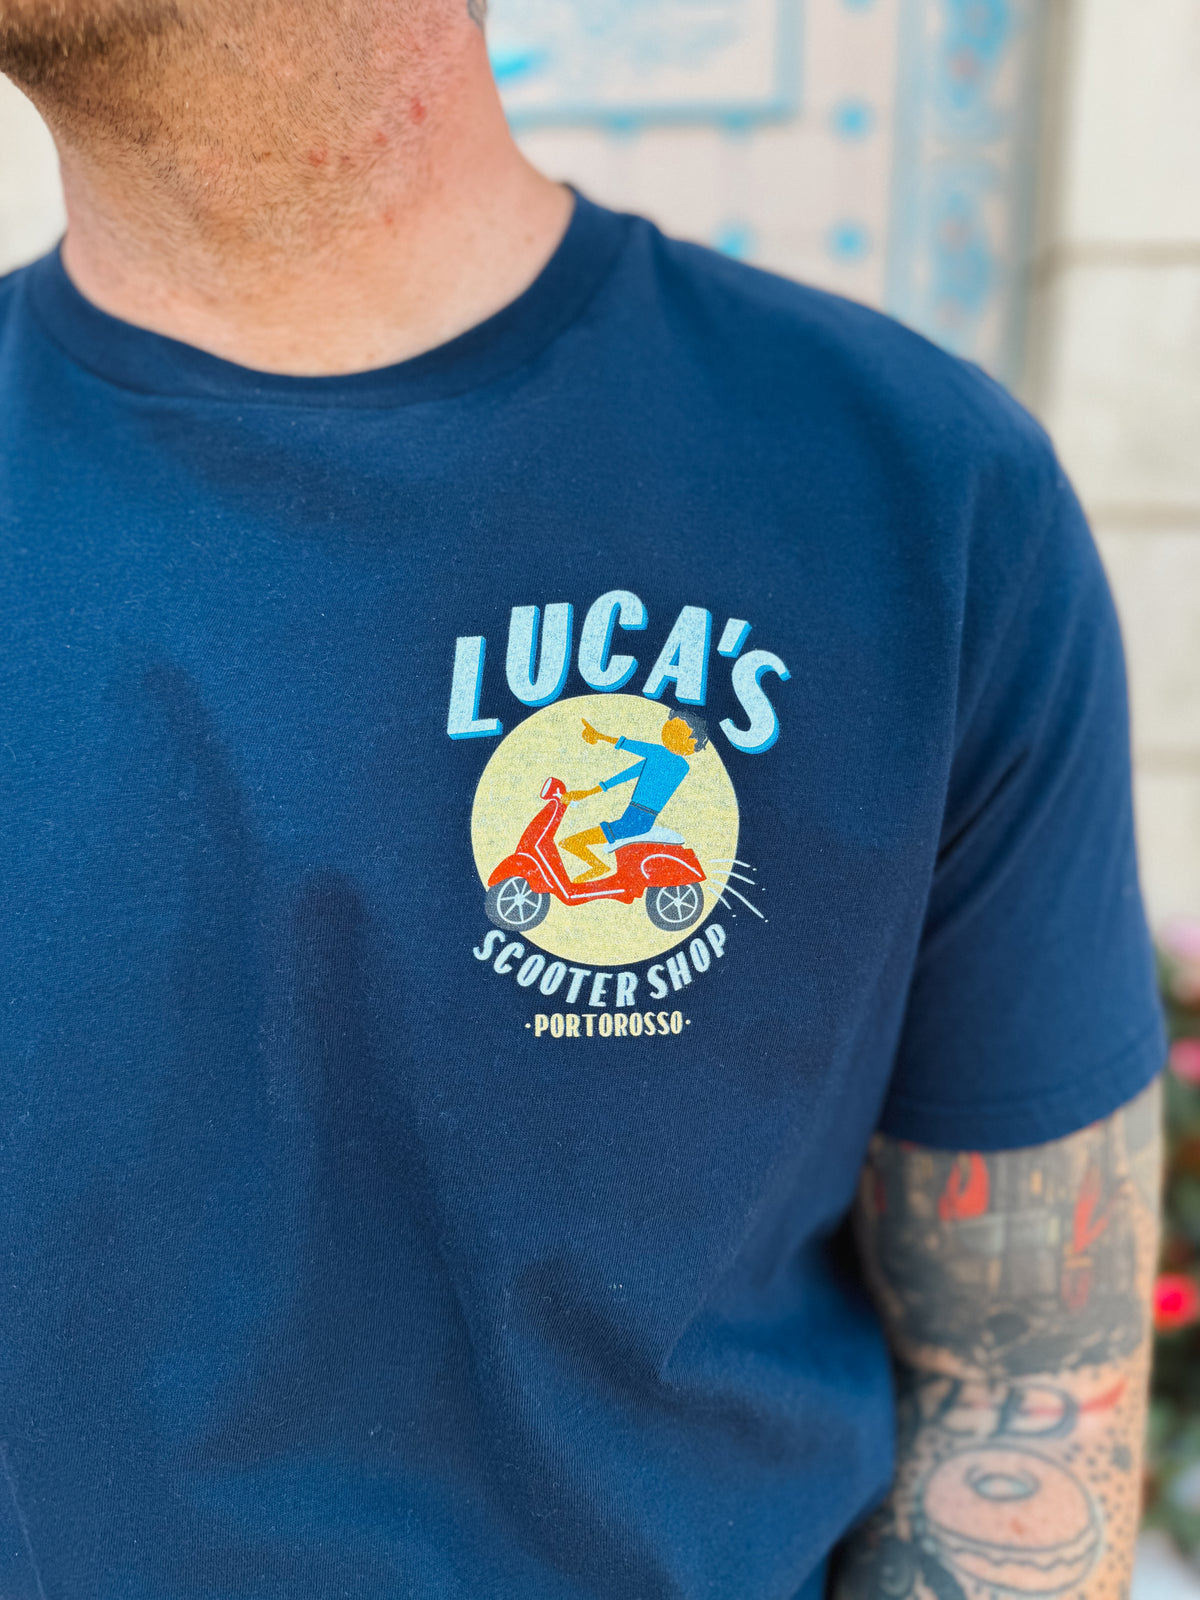 the lost bros Luca&#39;s Scooter Shop Tee